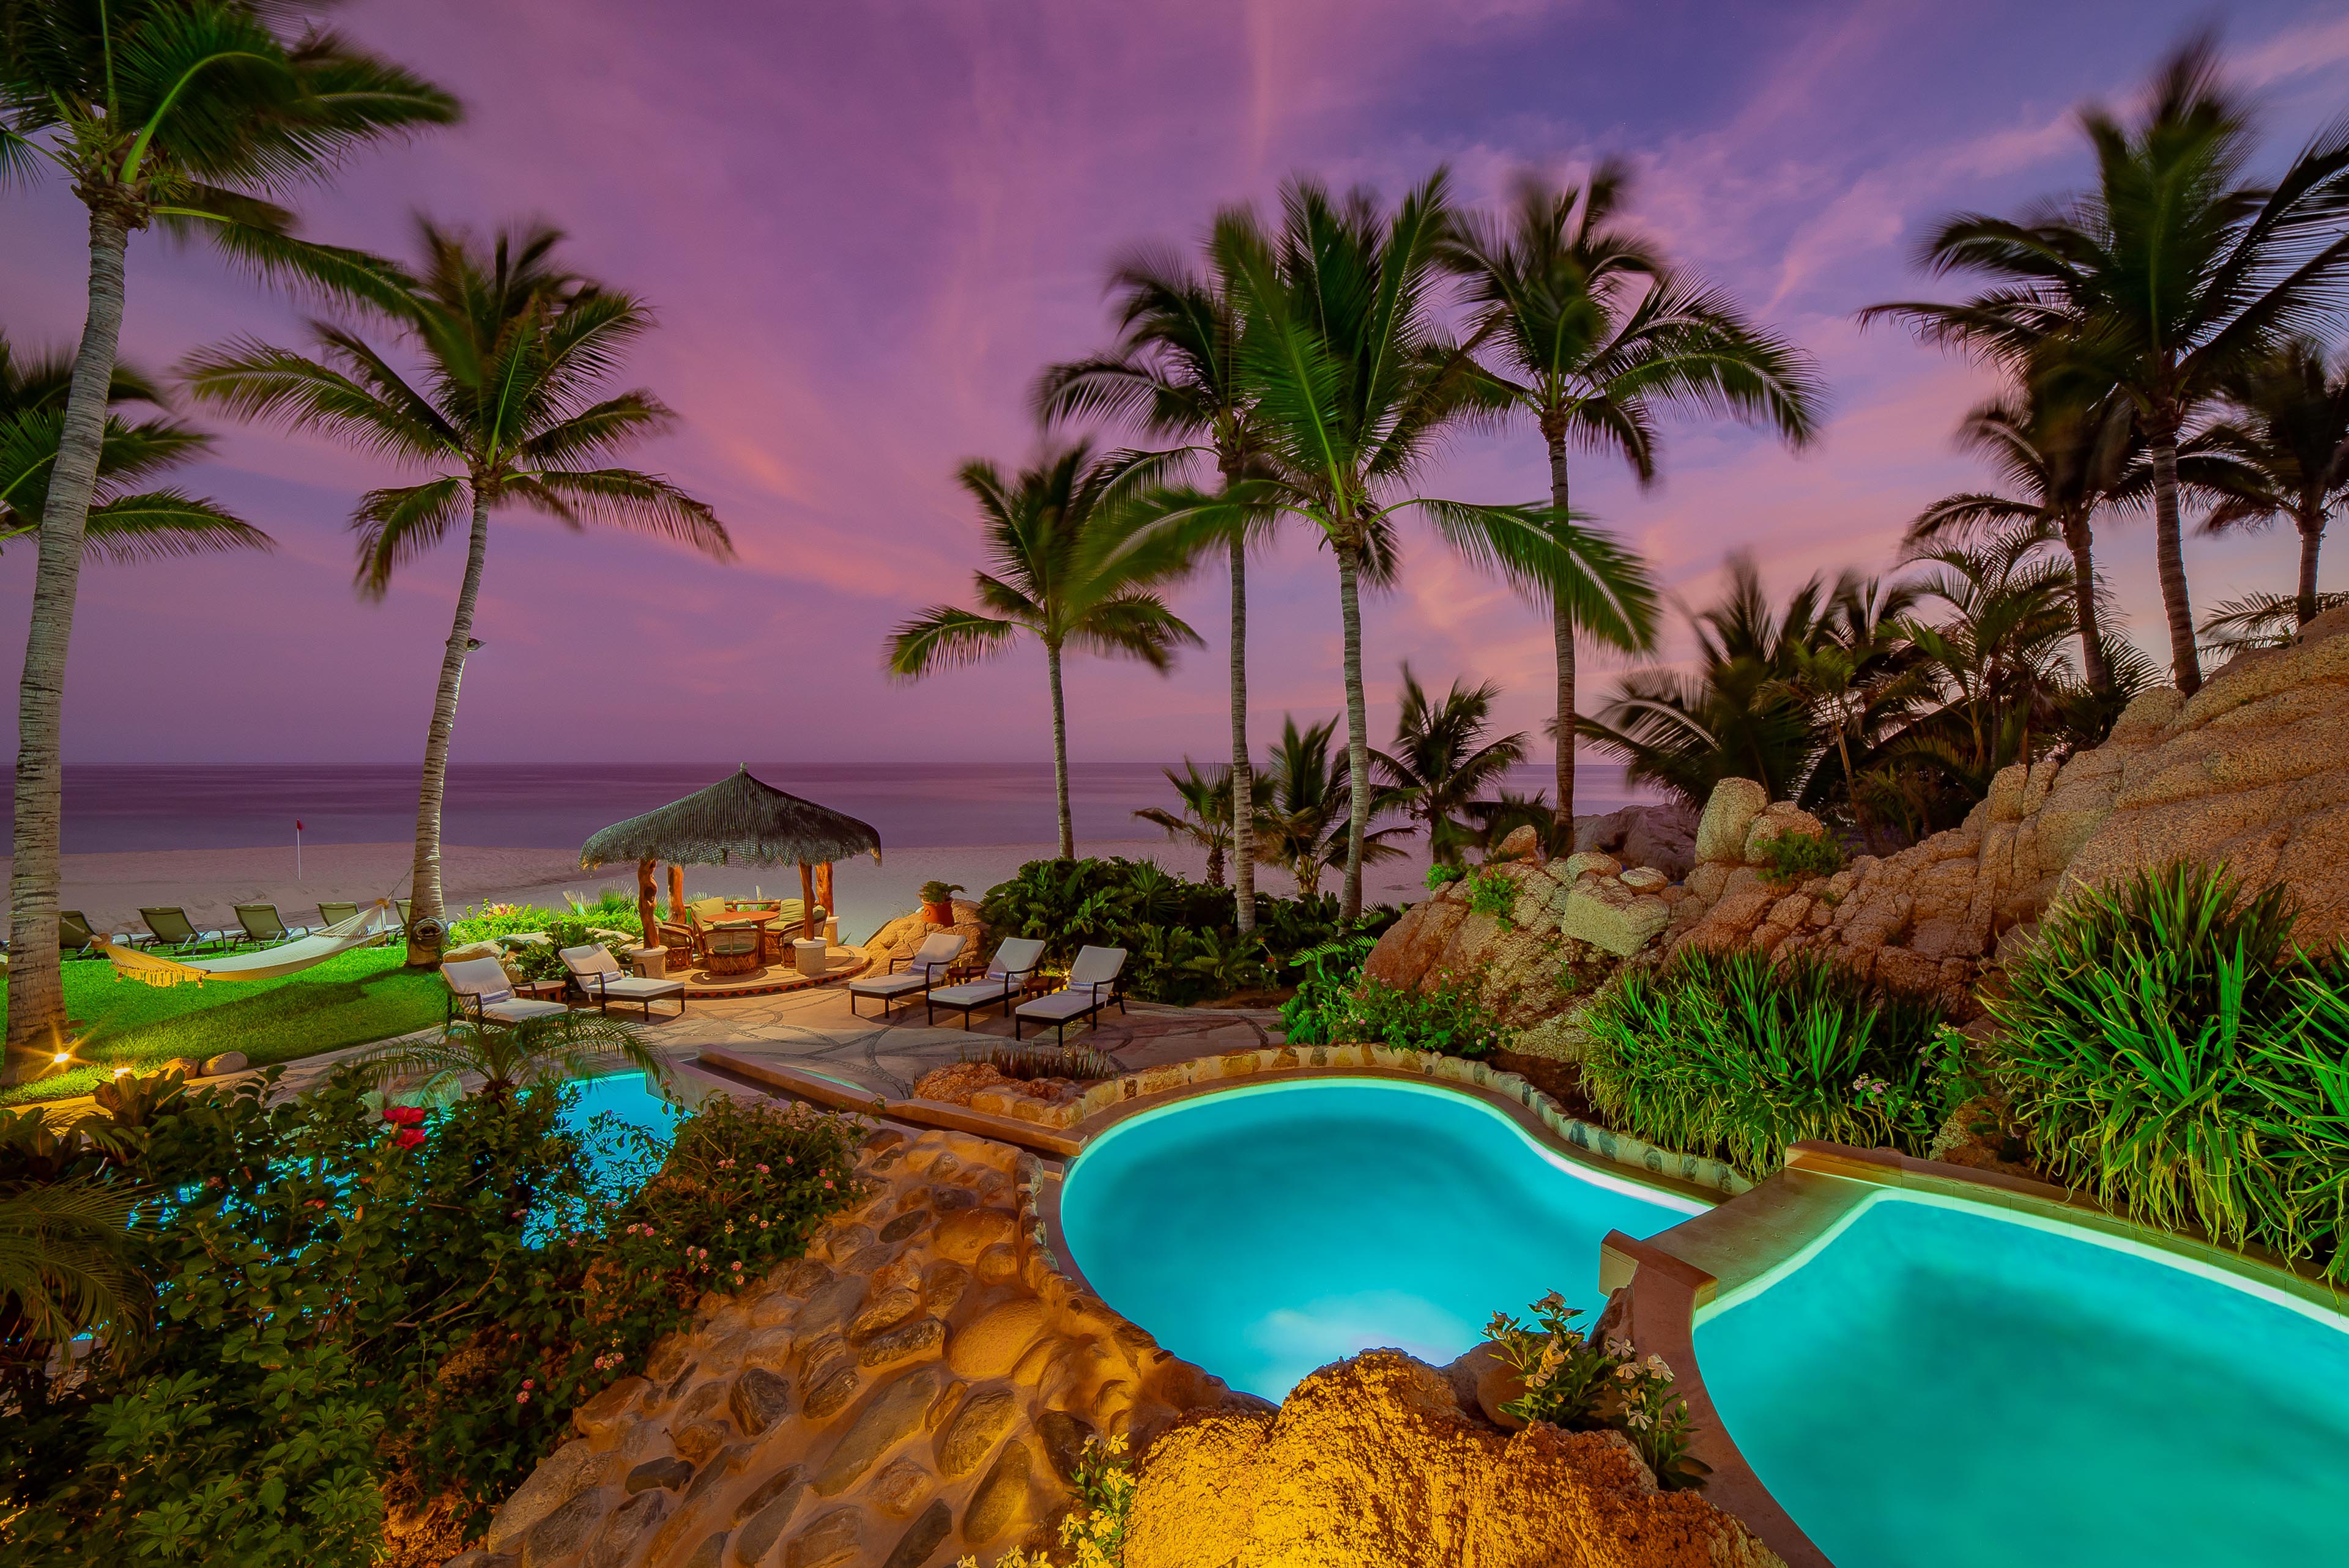 Gorgeous patio with pool and beach view during sunset